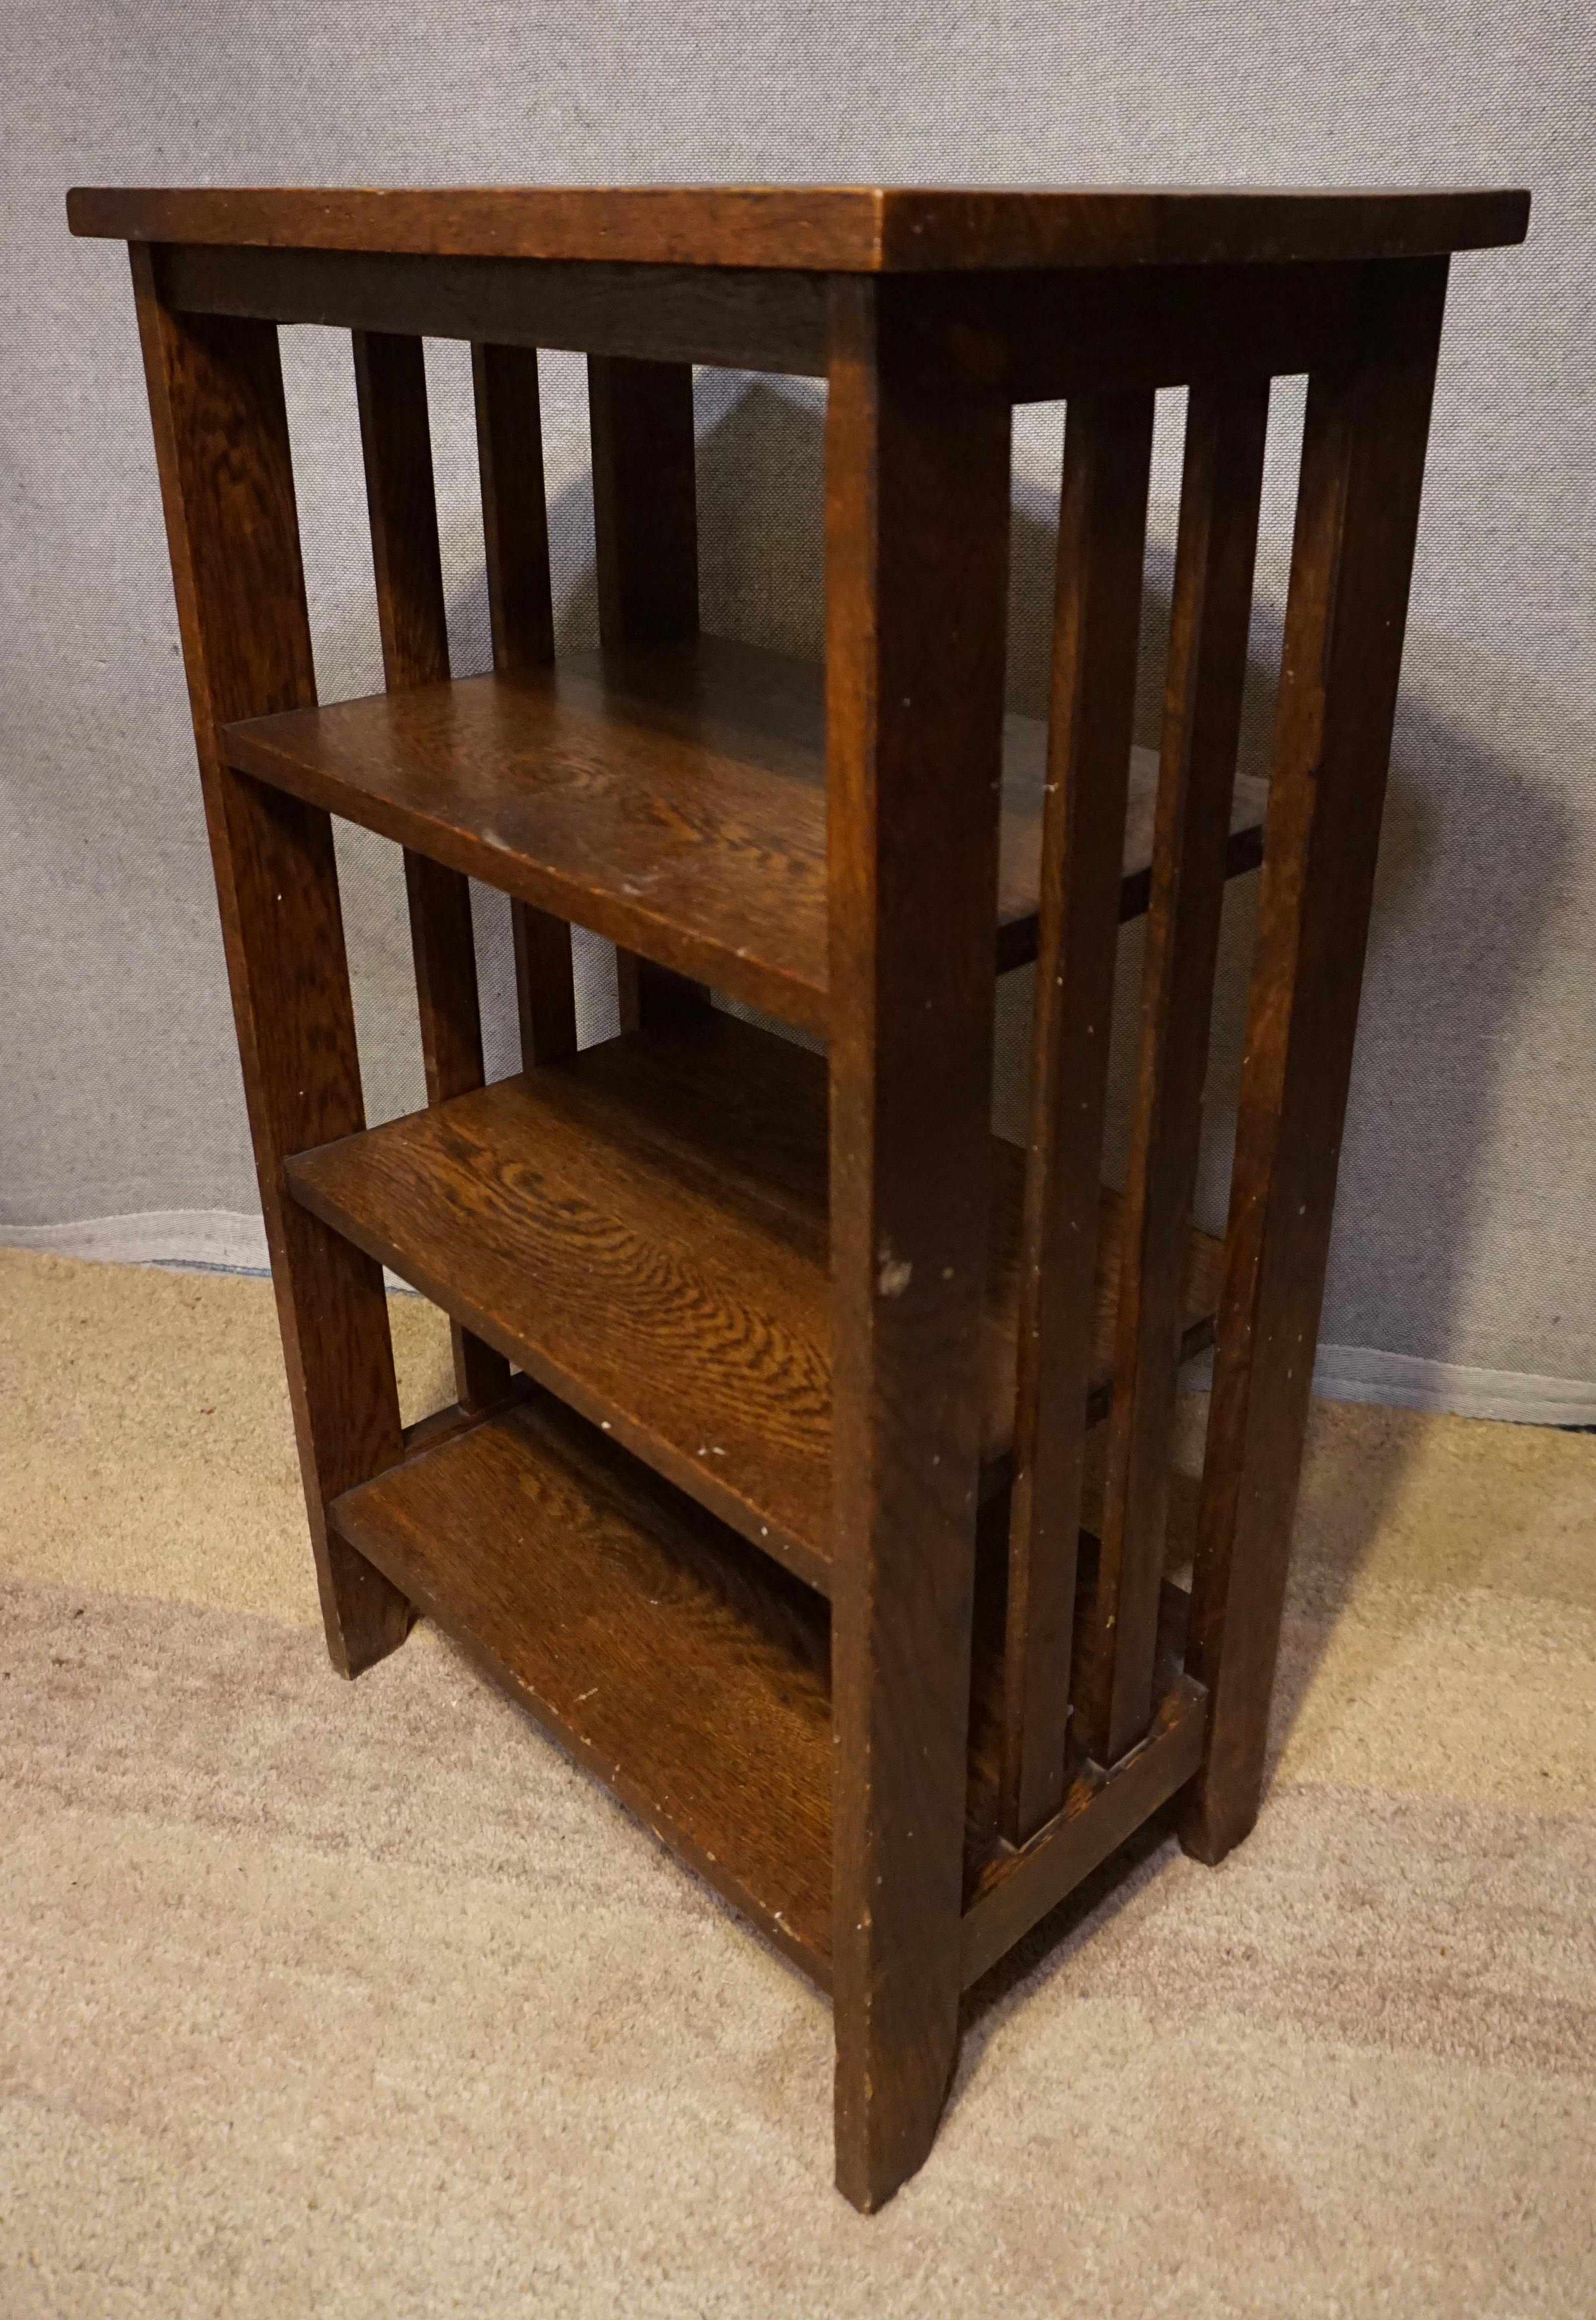 Circa 1910

Elegant and compact Arts & Crafts 3 tiered bookshelf with subtle workmanship and clean lines in dark, quarter sawn solid oak. Ideal for a small space/nook.